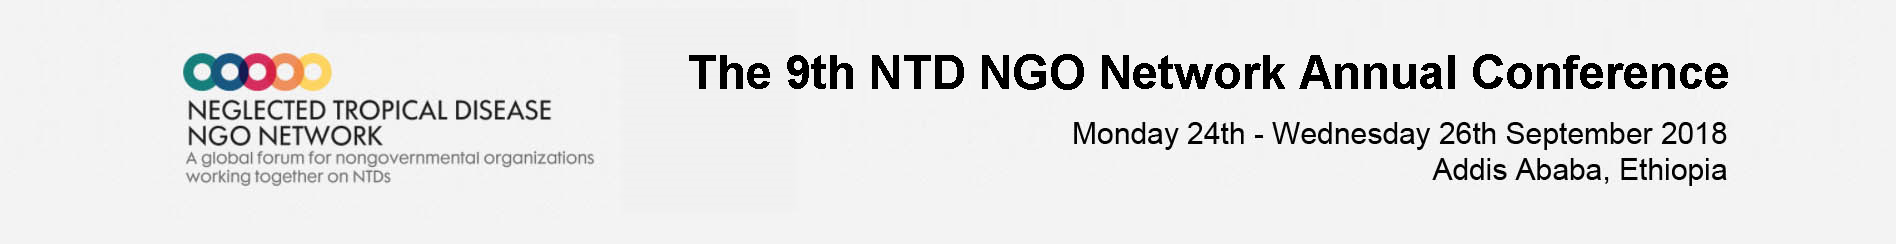 The 9th NTD NGO Network Annual Conference